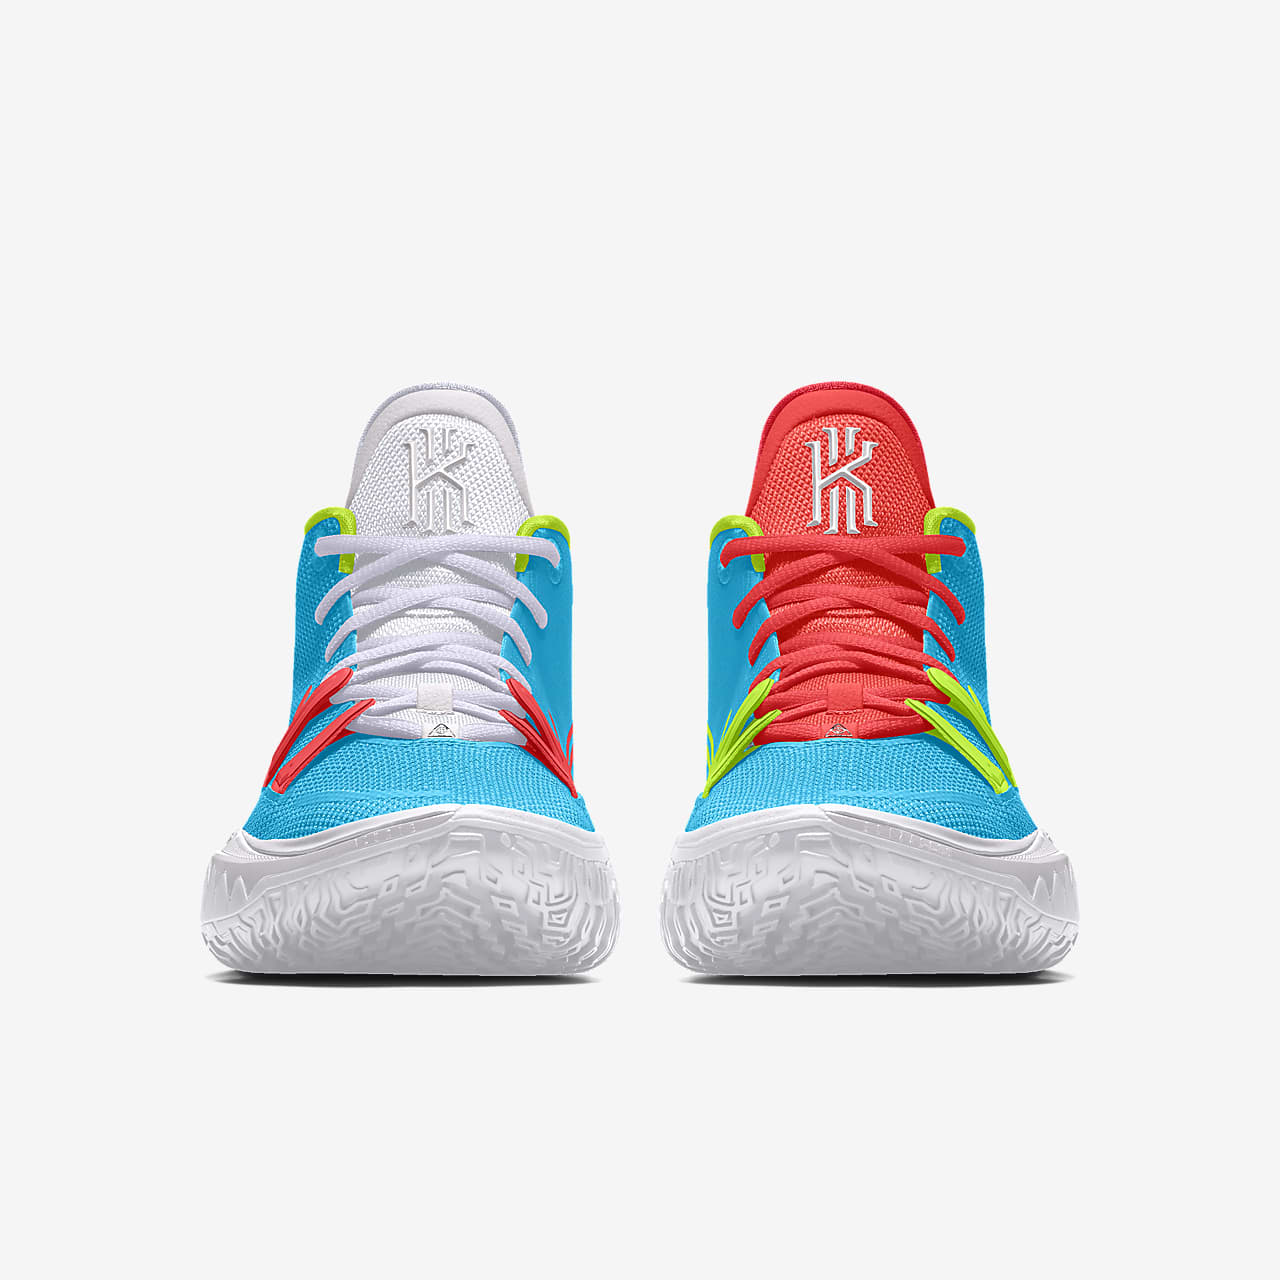 nike kyrie by you